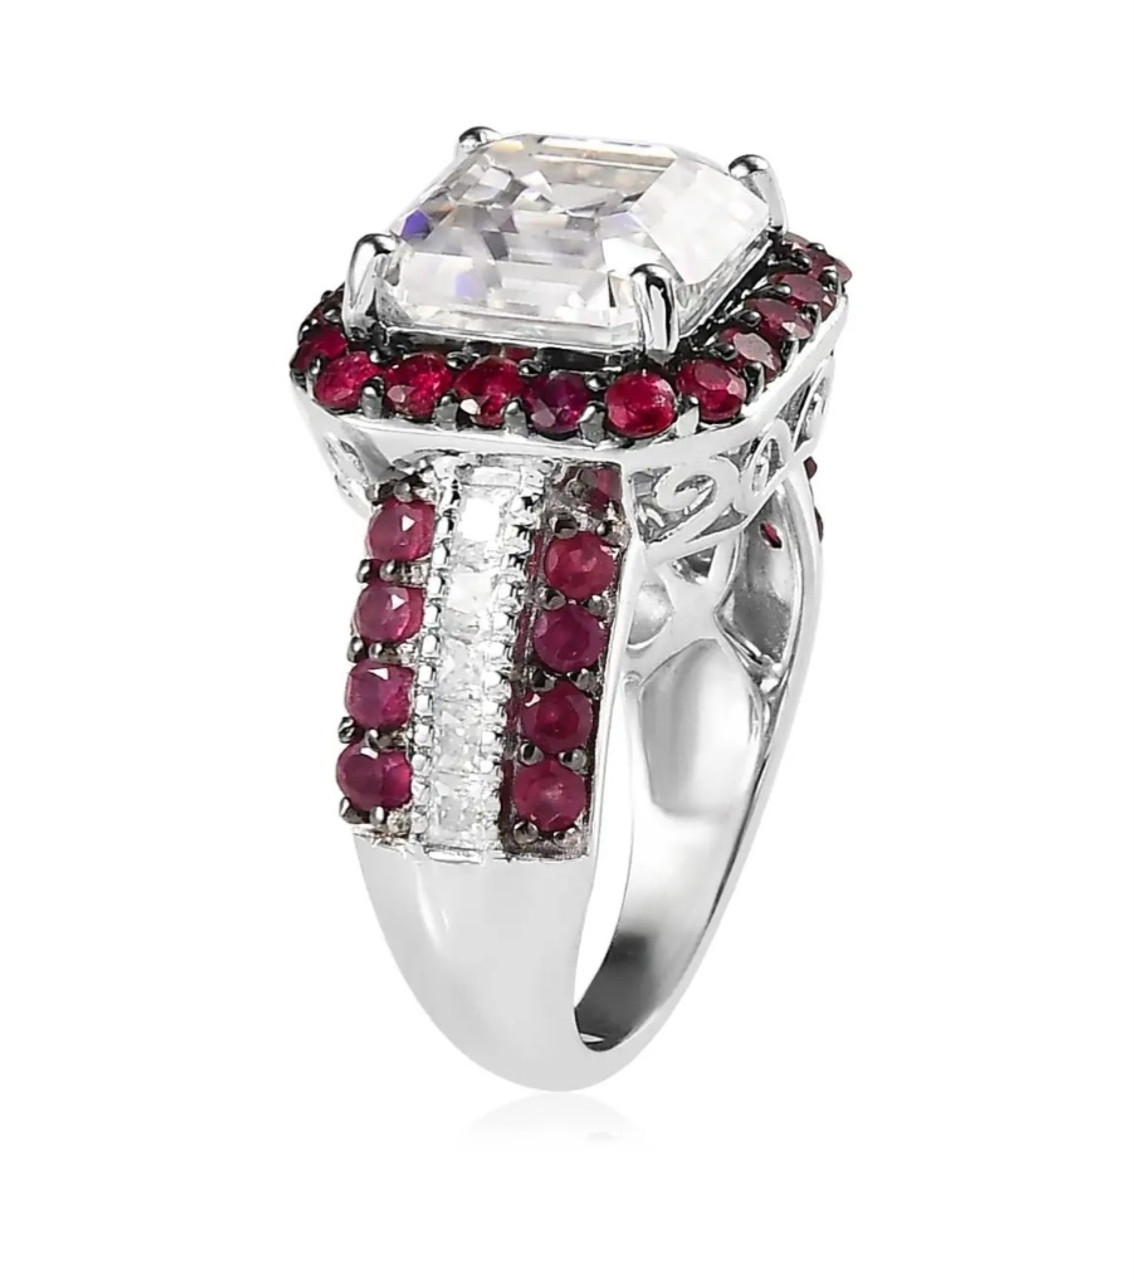 Double Halo 2.15CT Pink Asscher Cut Ruby Engagement 935 Argentium Silver  Ring | eBay